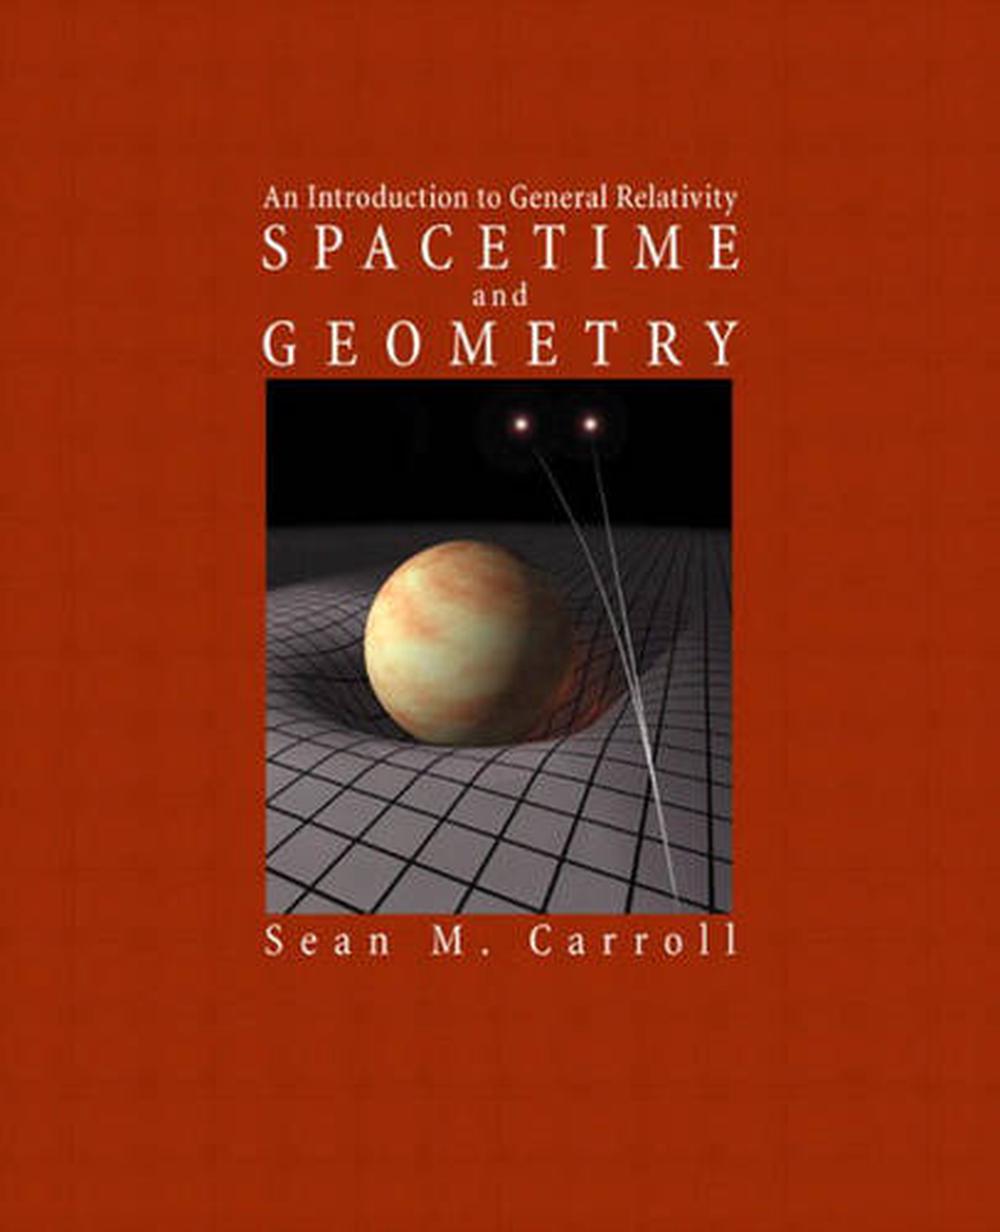 straight line geometry of space time